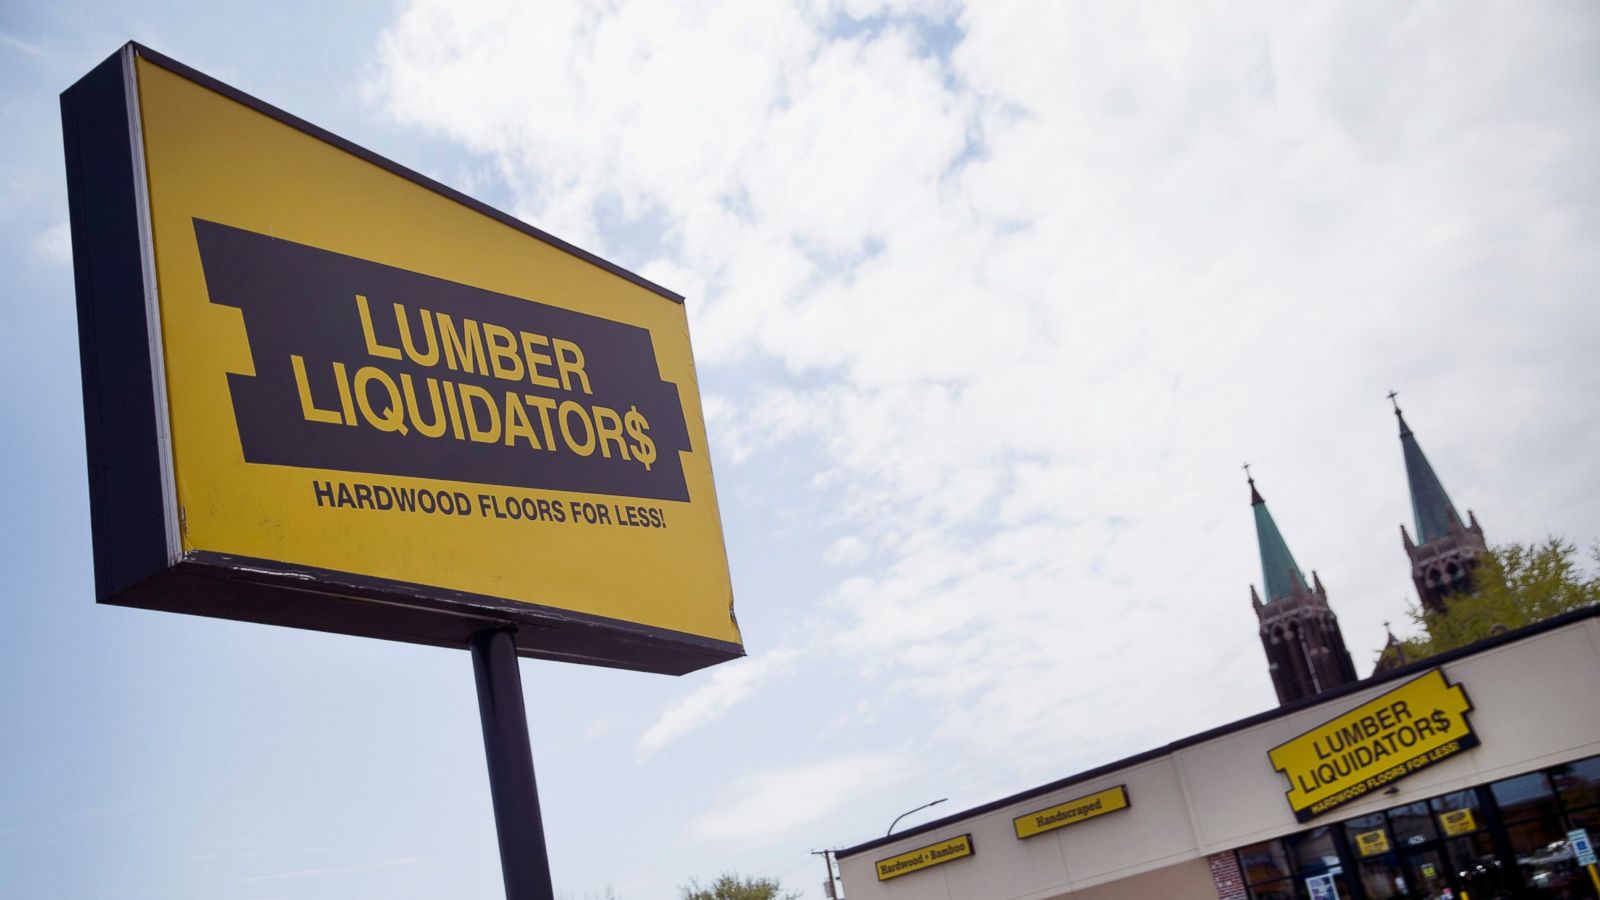 Lumber Liquidators Flooring From China: What You Need to Know About the  CDC's New Report - ABC News